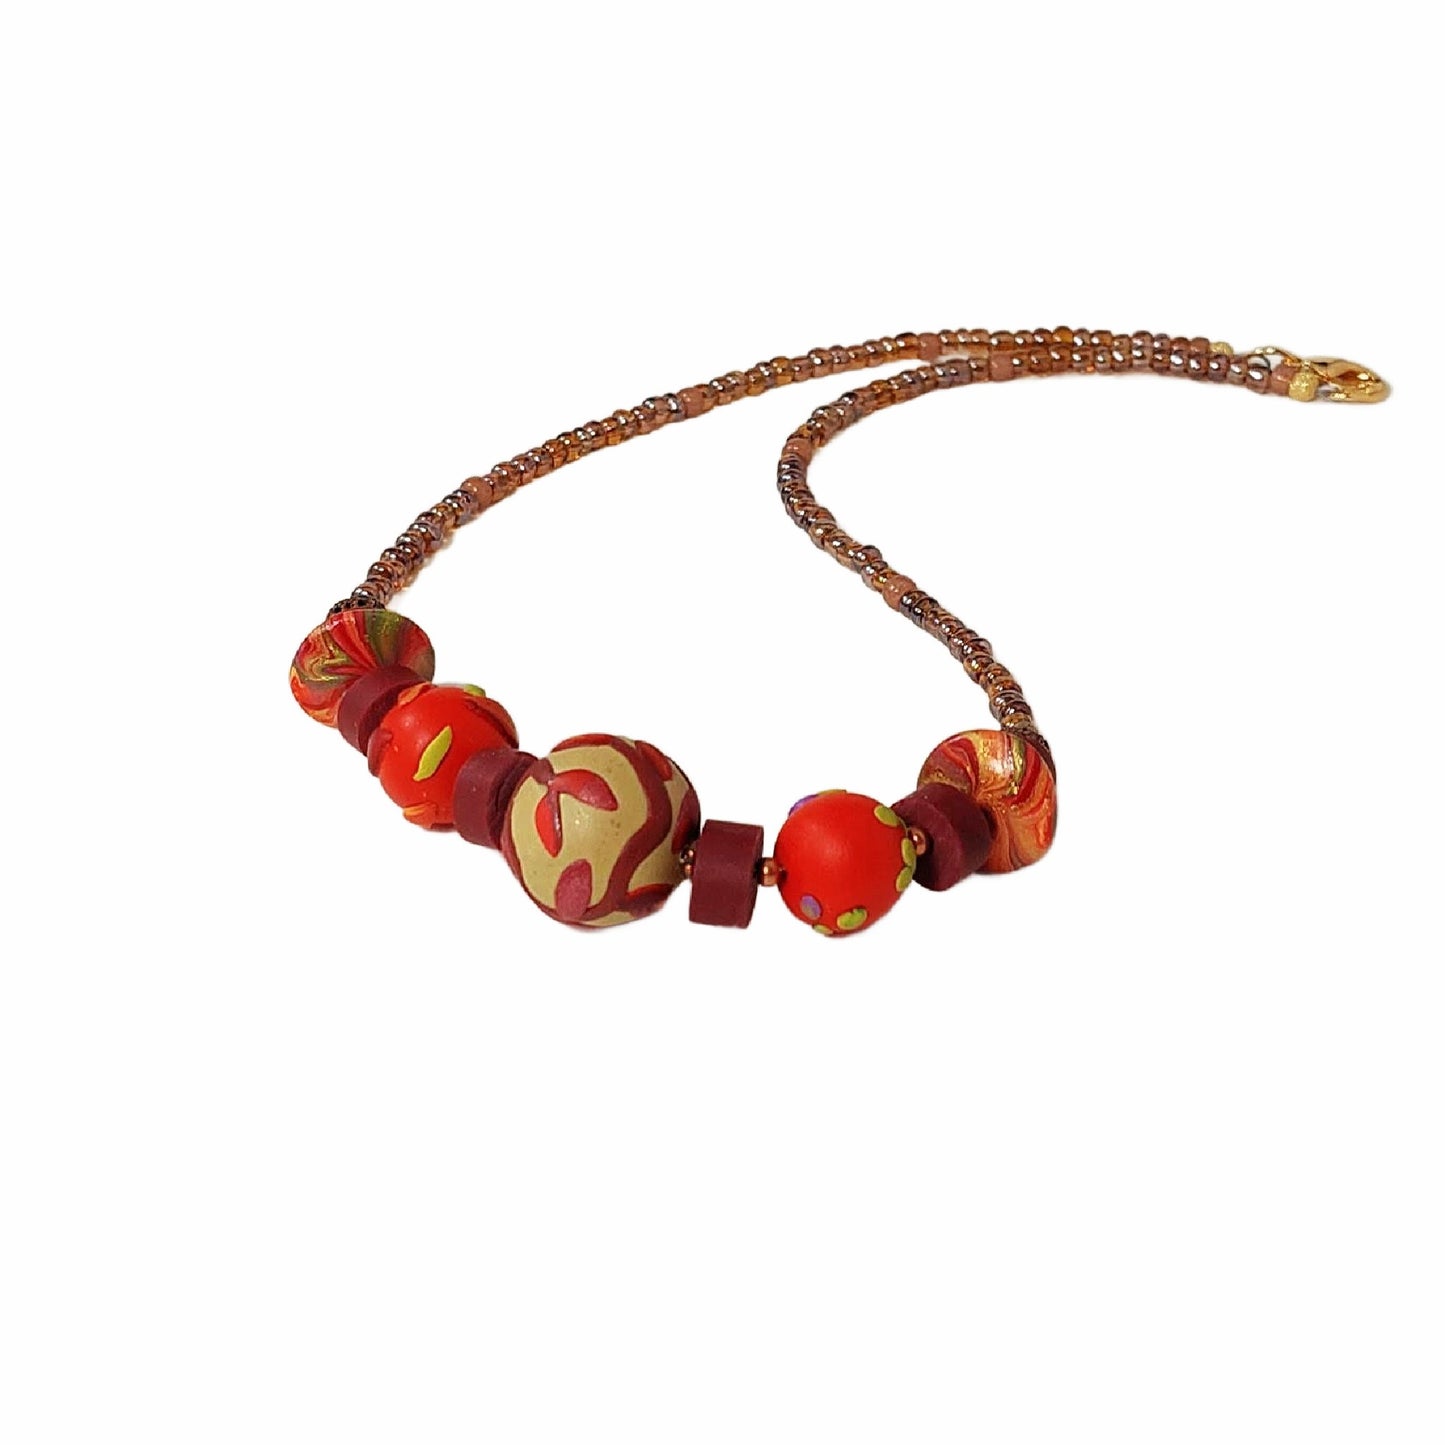 Rustic Leaves Beaded Necklace for women, lightweight and comfortable on your neck. Adds a  pop of color to your outfit. Lightweight and comfortable to wear. Free shipping in the US.